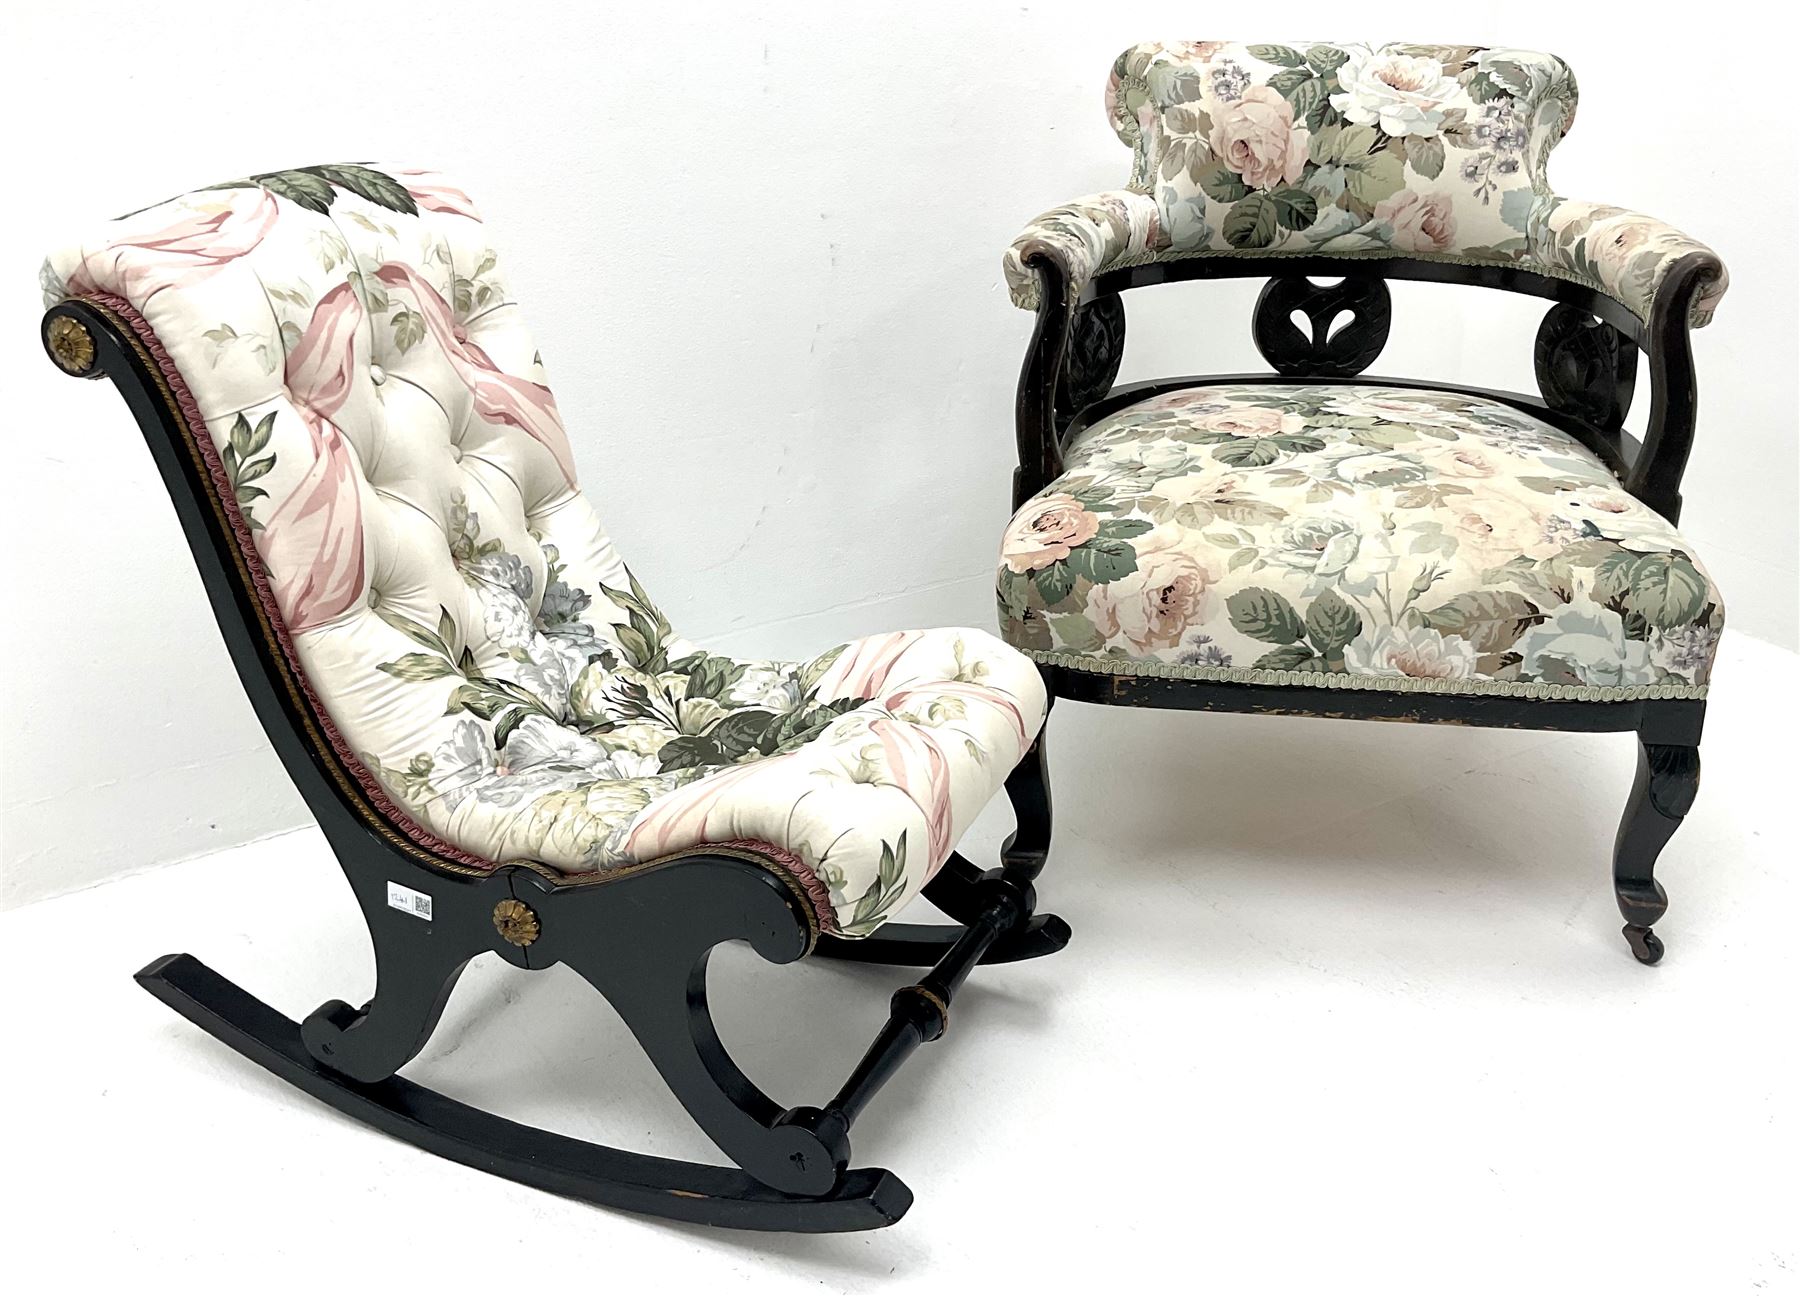 Early 20th century tub shaped armchair